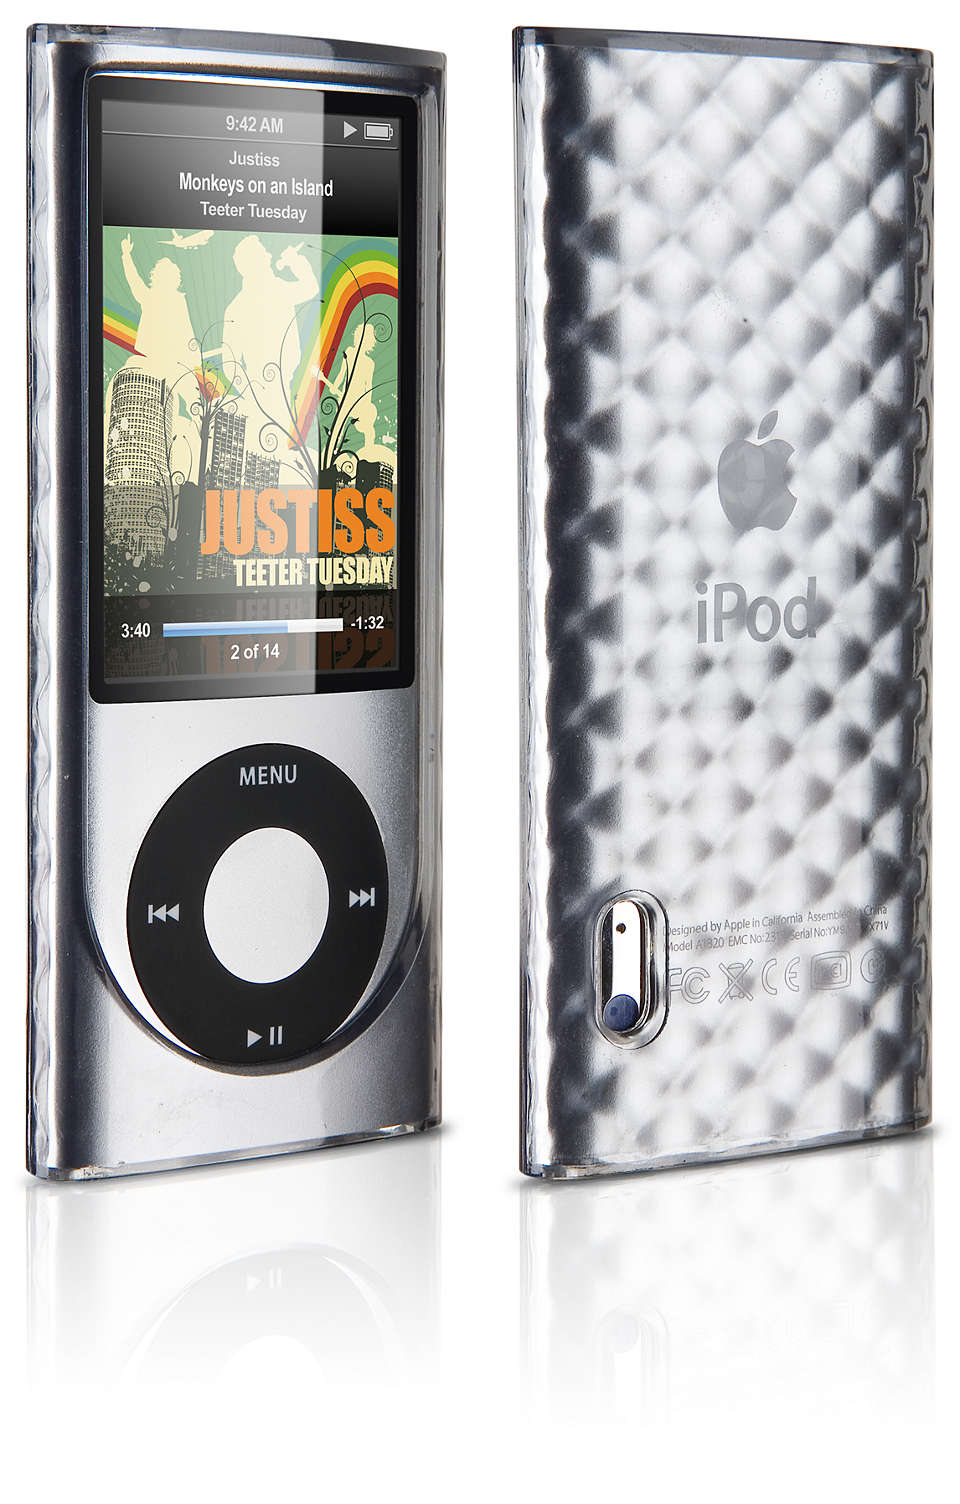 Protect your iPod in a flexible case